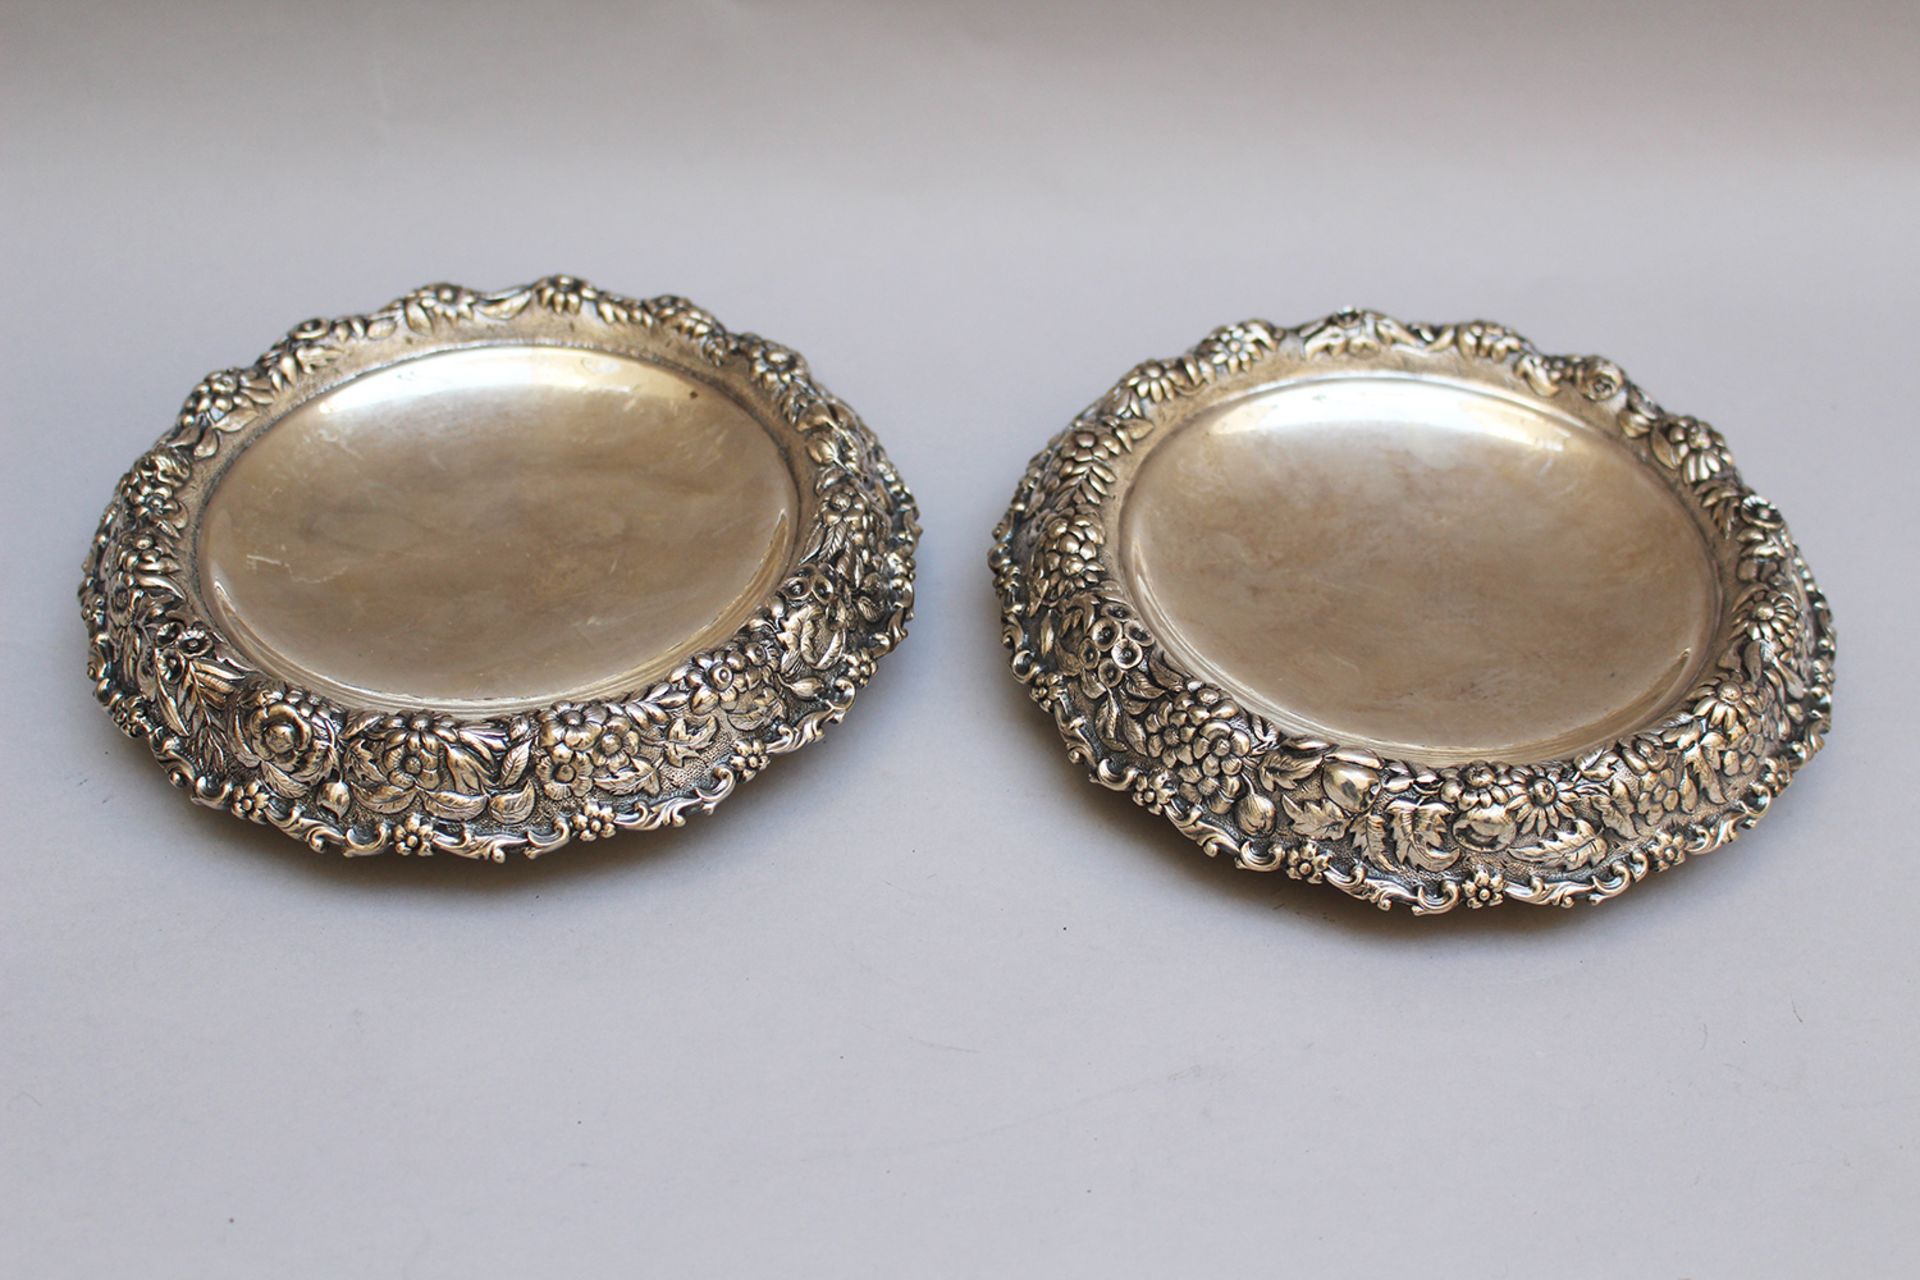 Two Tiffany tazzas round shape with lowered centre surrounded by floral decorations, stamped on